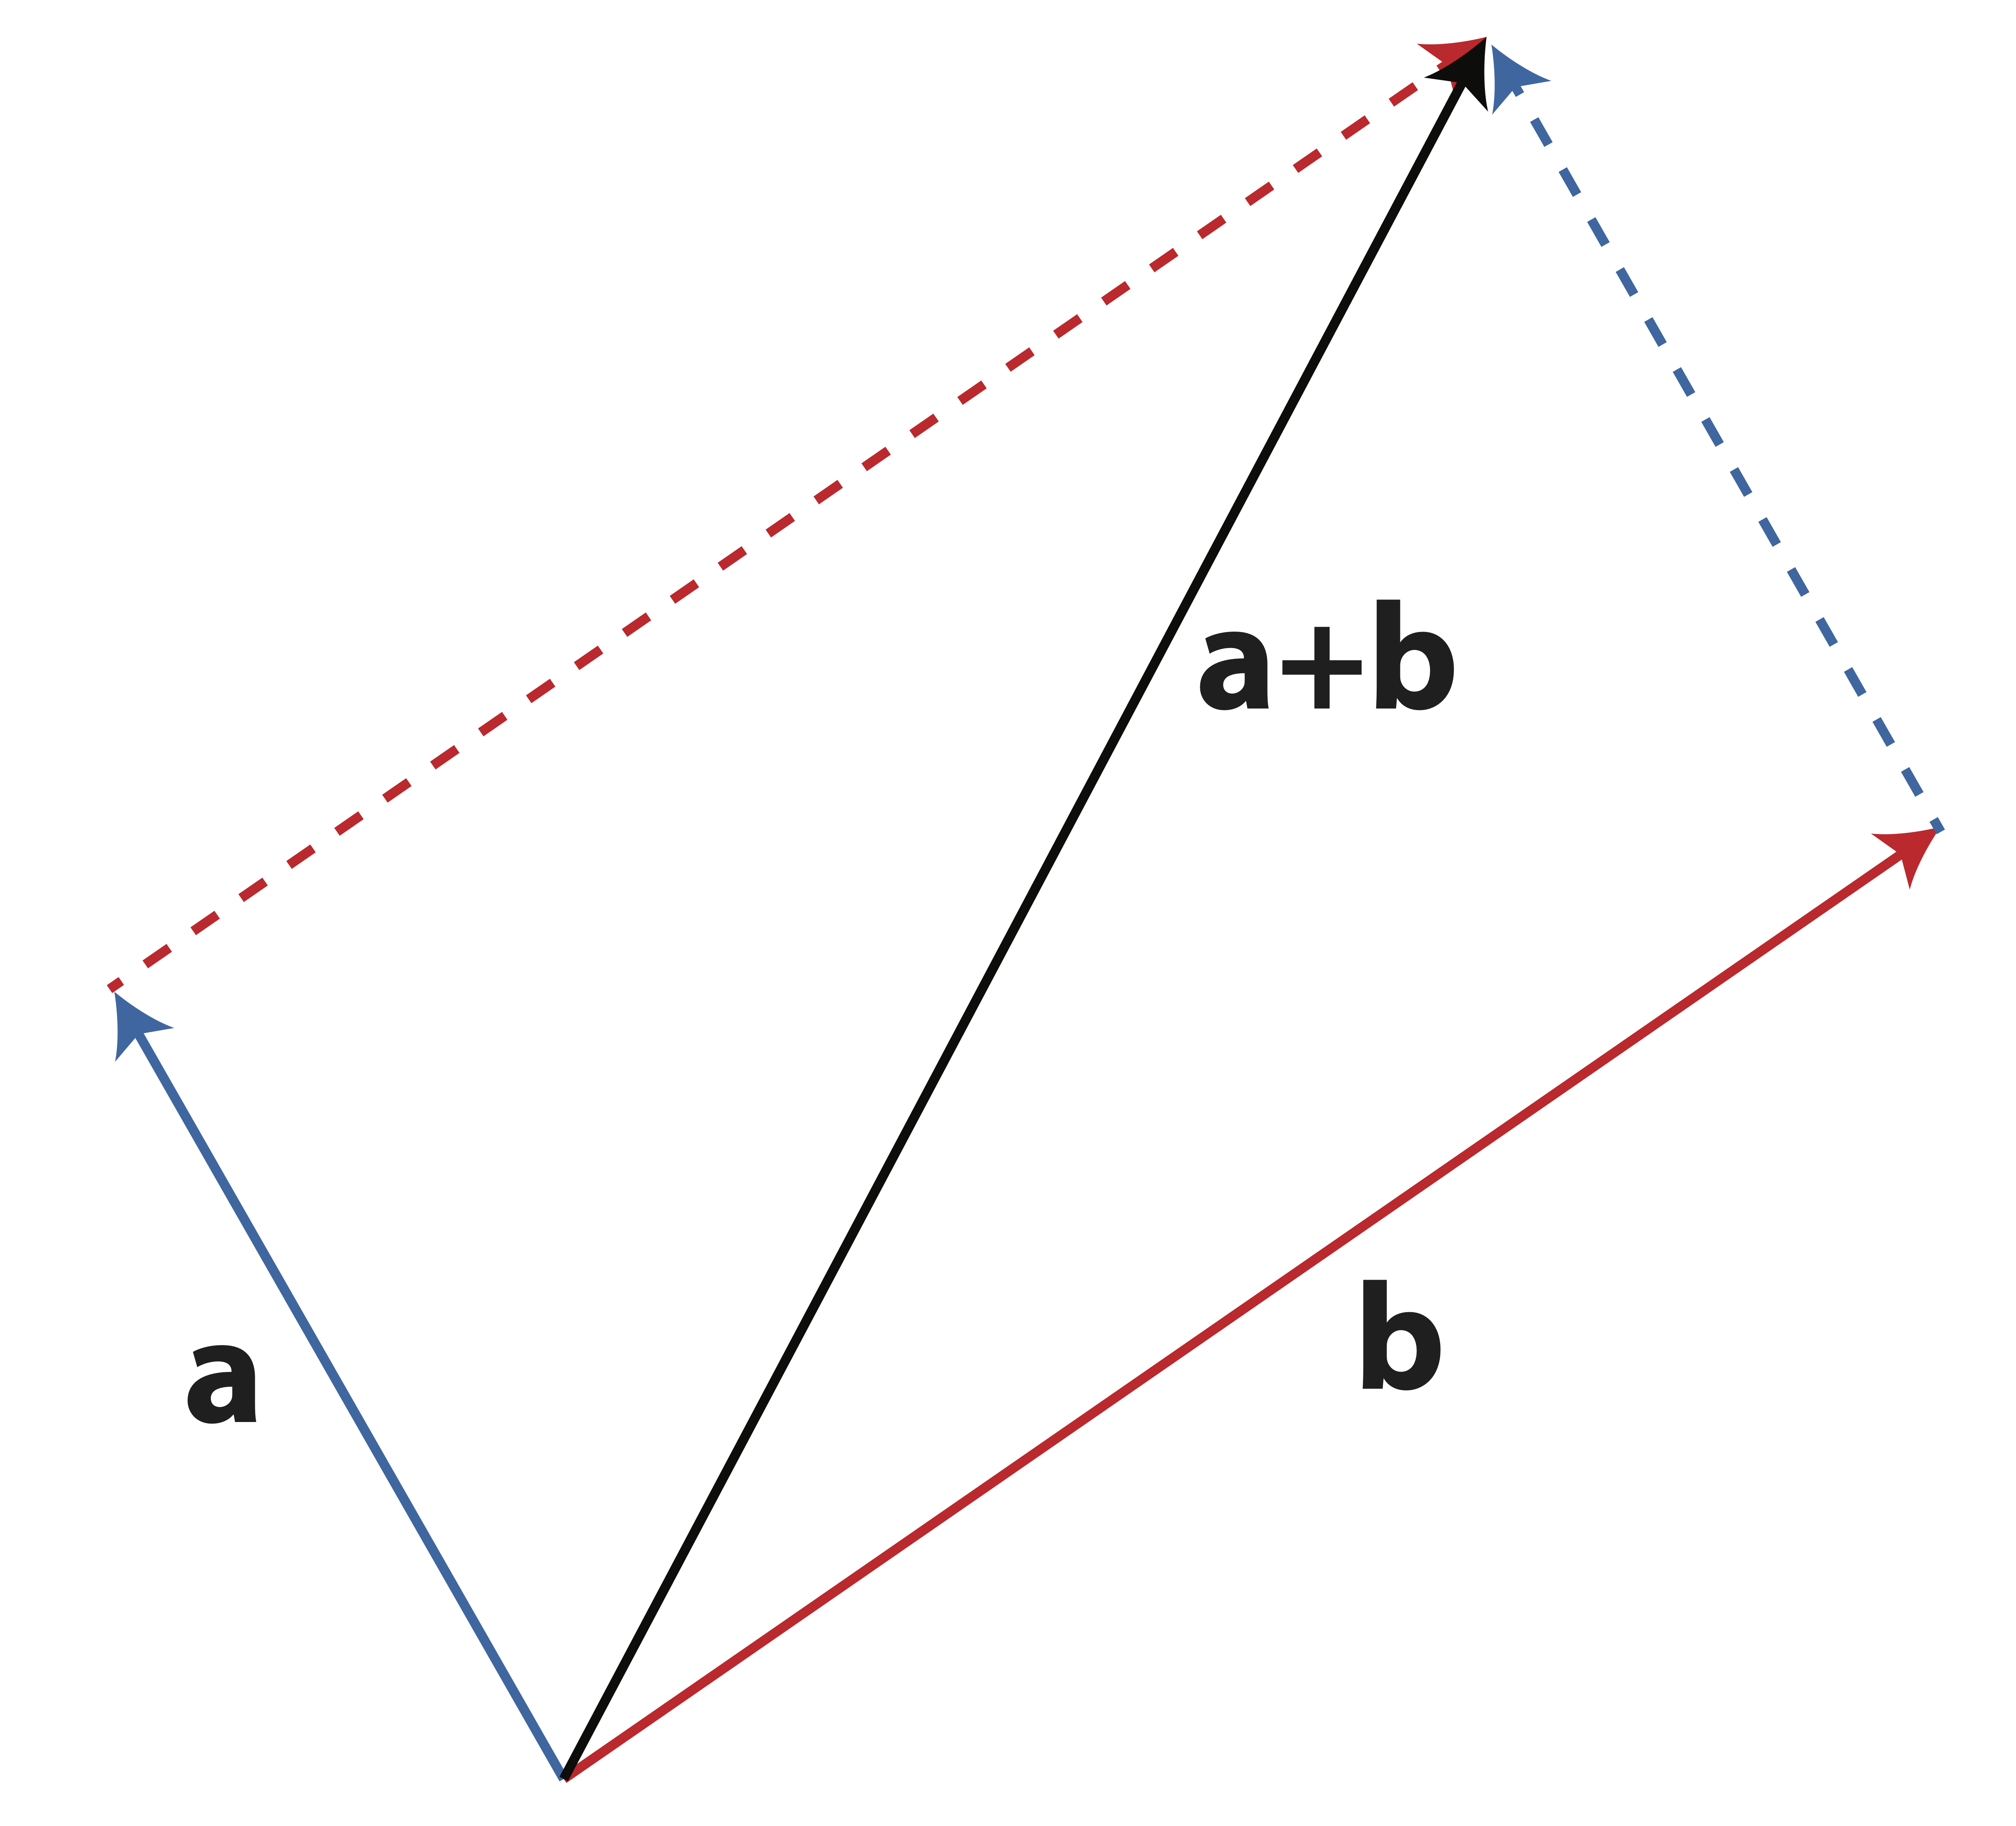 Geometrical addition of vectors: Head-to-tail